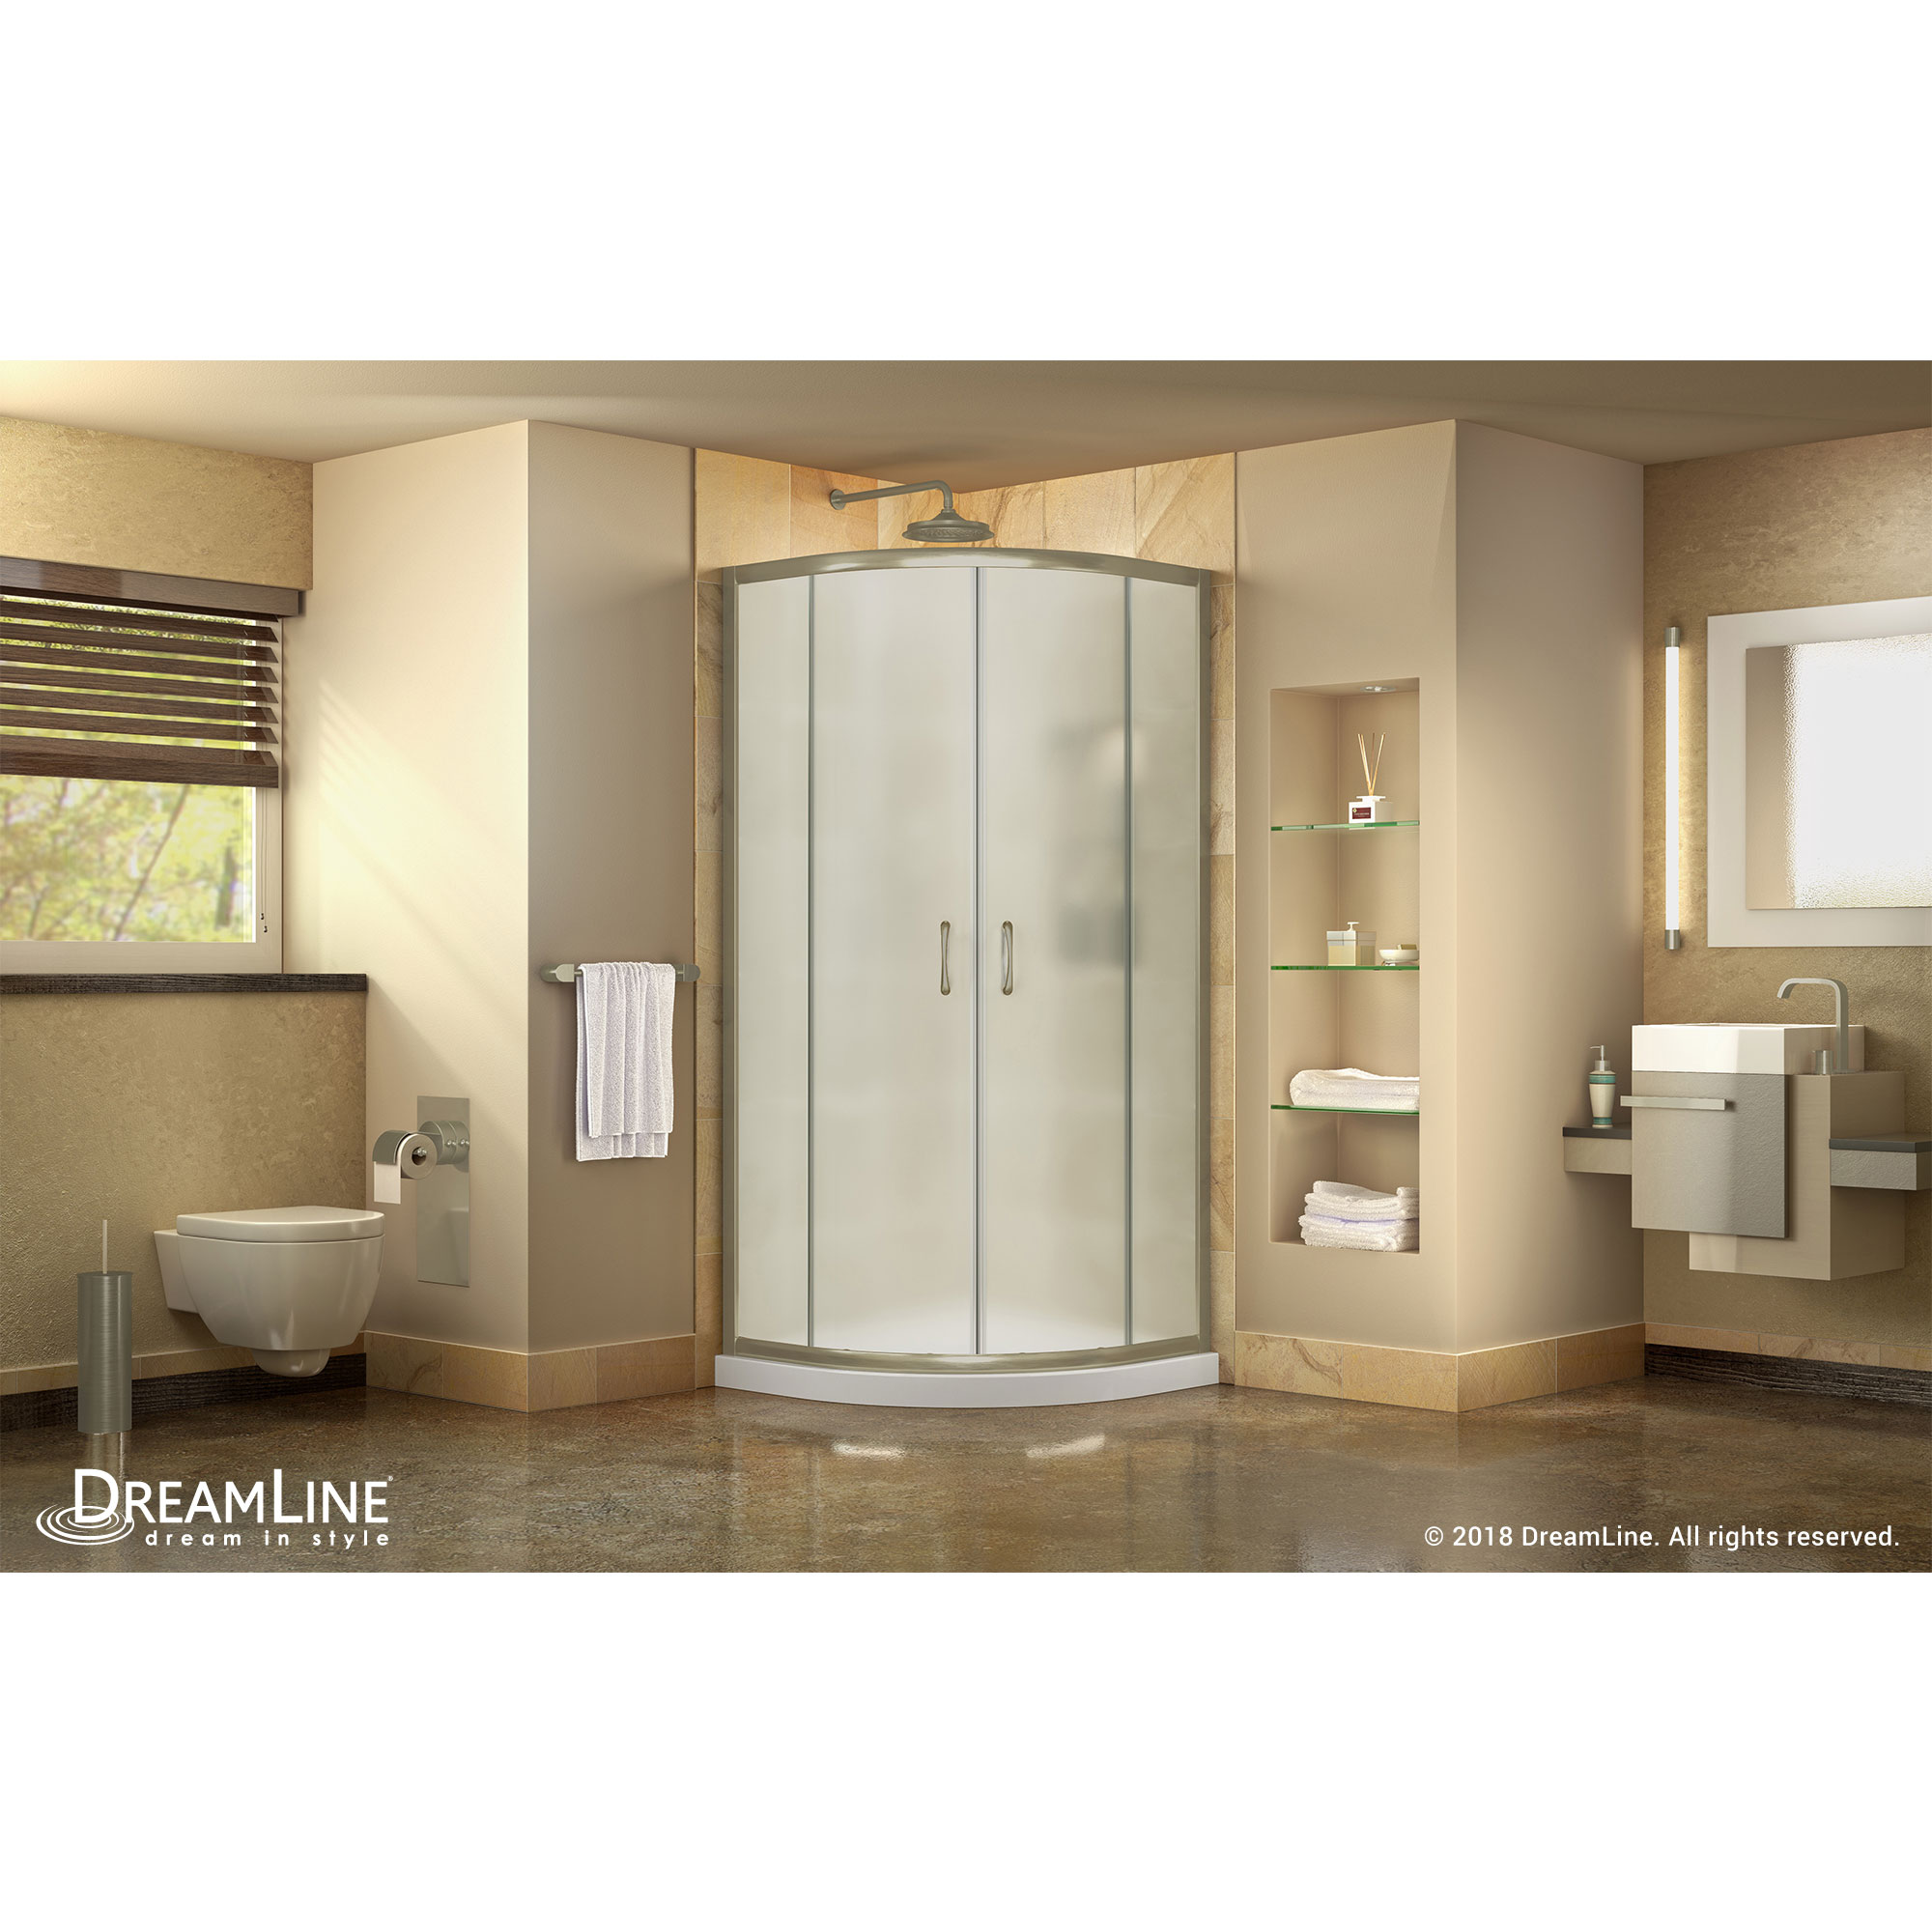 DreamLine Prime 38 in. x 74 3/4 in. Semi-Frameless Frosted Glass Sliding Shower Enclosure in Brushed Nickel with White Base Kit